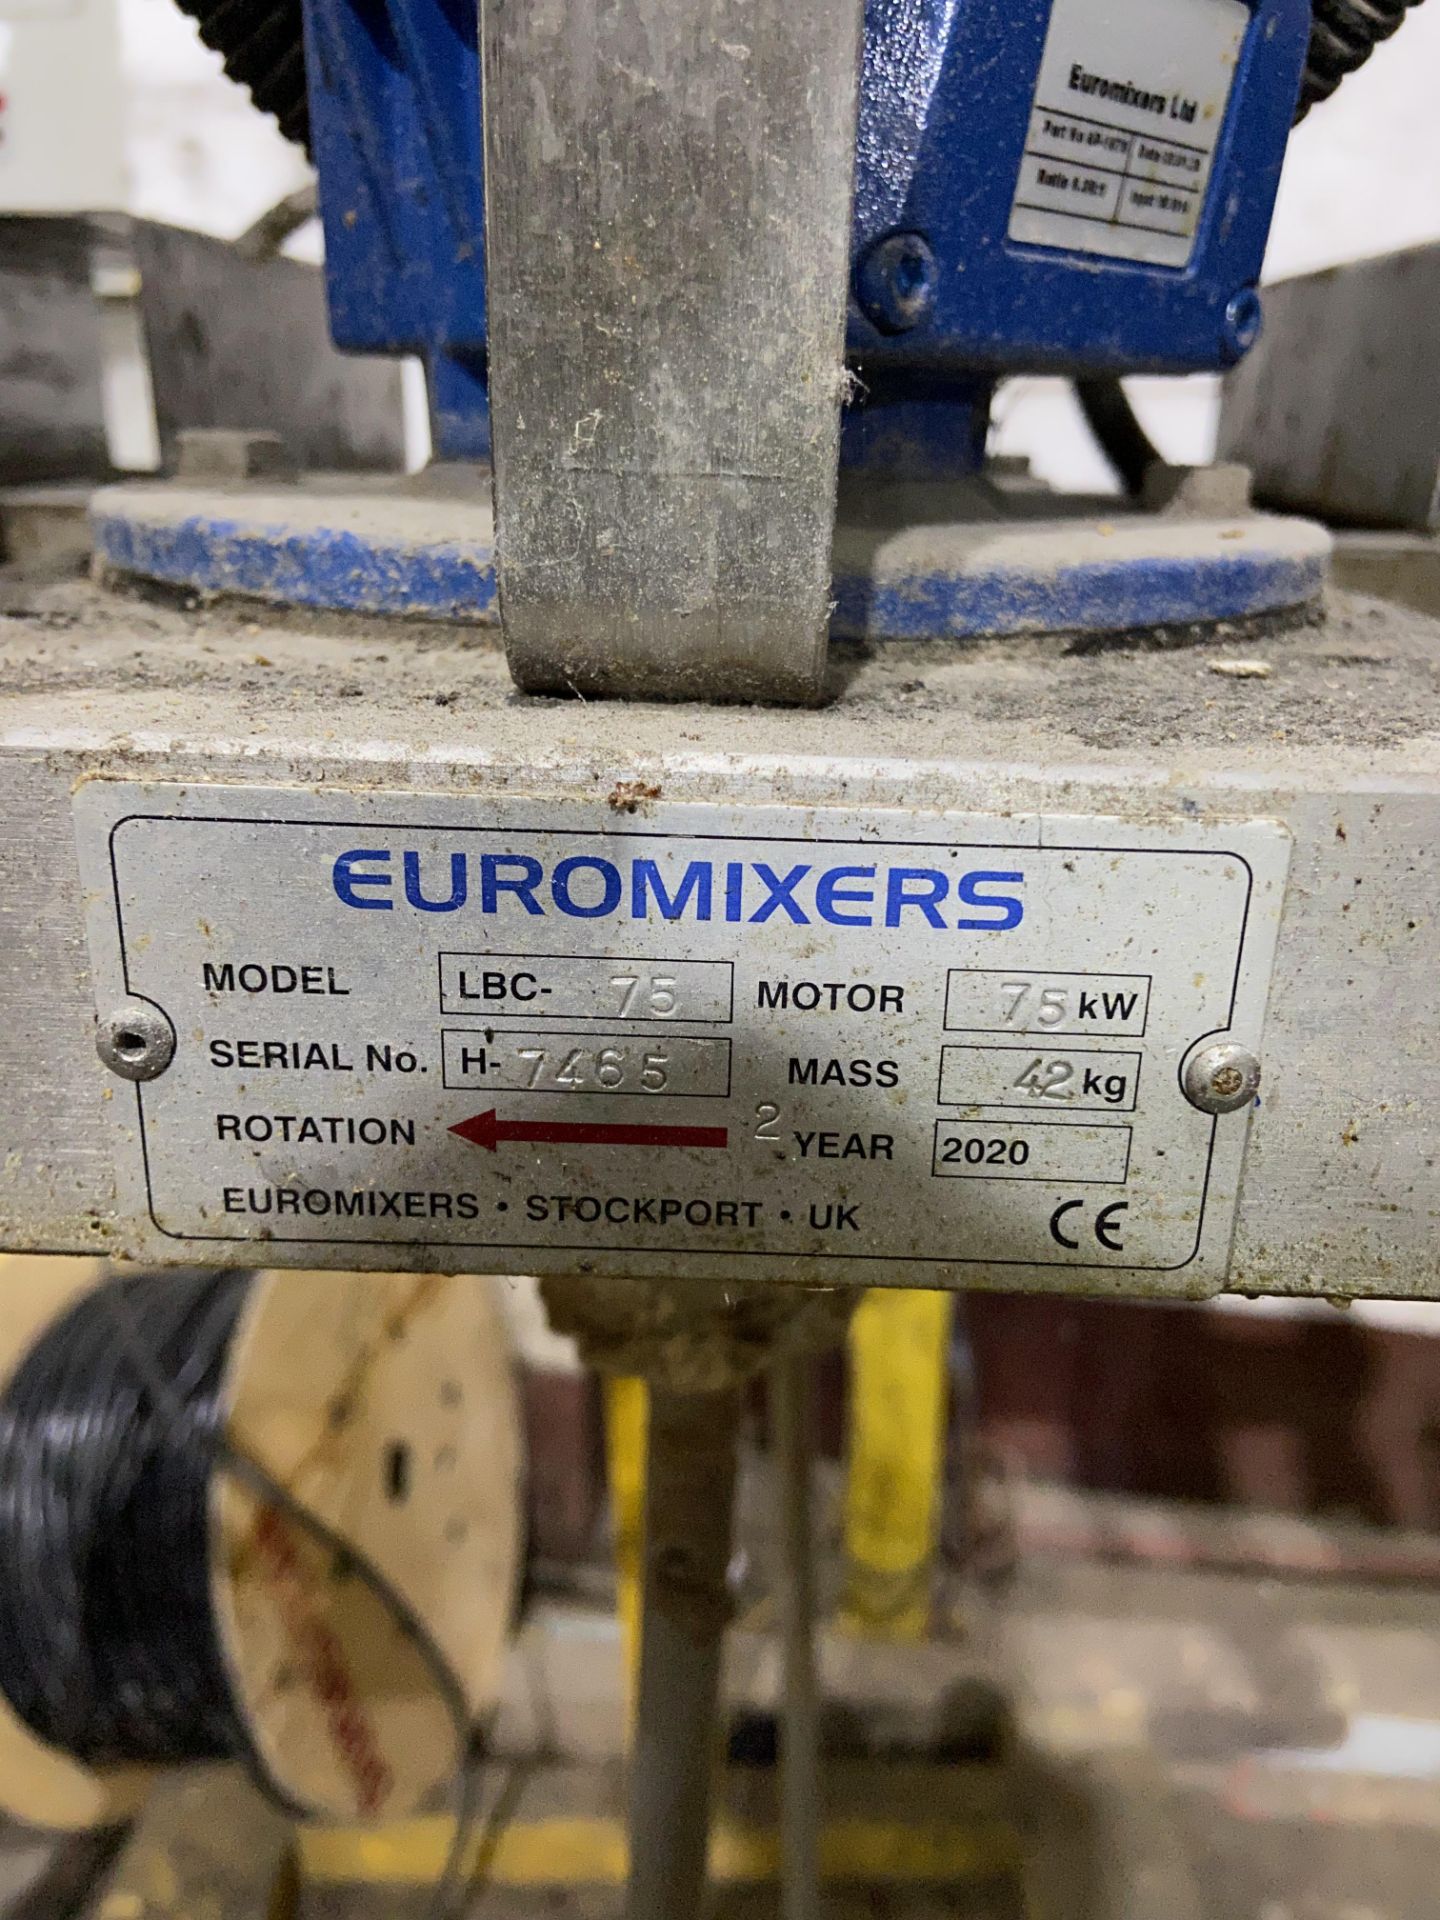 (SRL) Euromixers LBC-75 IBC MIXER & AGITATOR, serial no. 7465, year of manufacture 2020, 240V, - Image 2 of 2